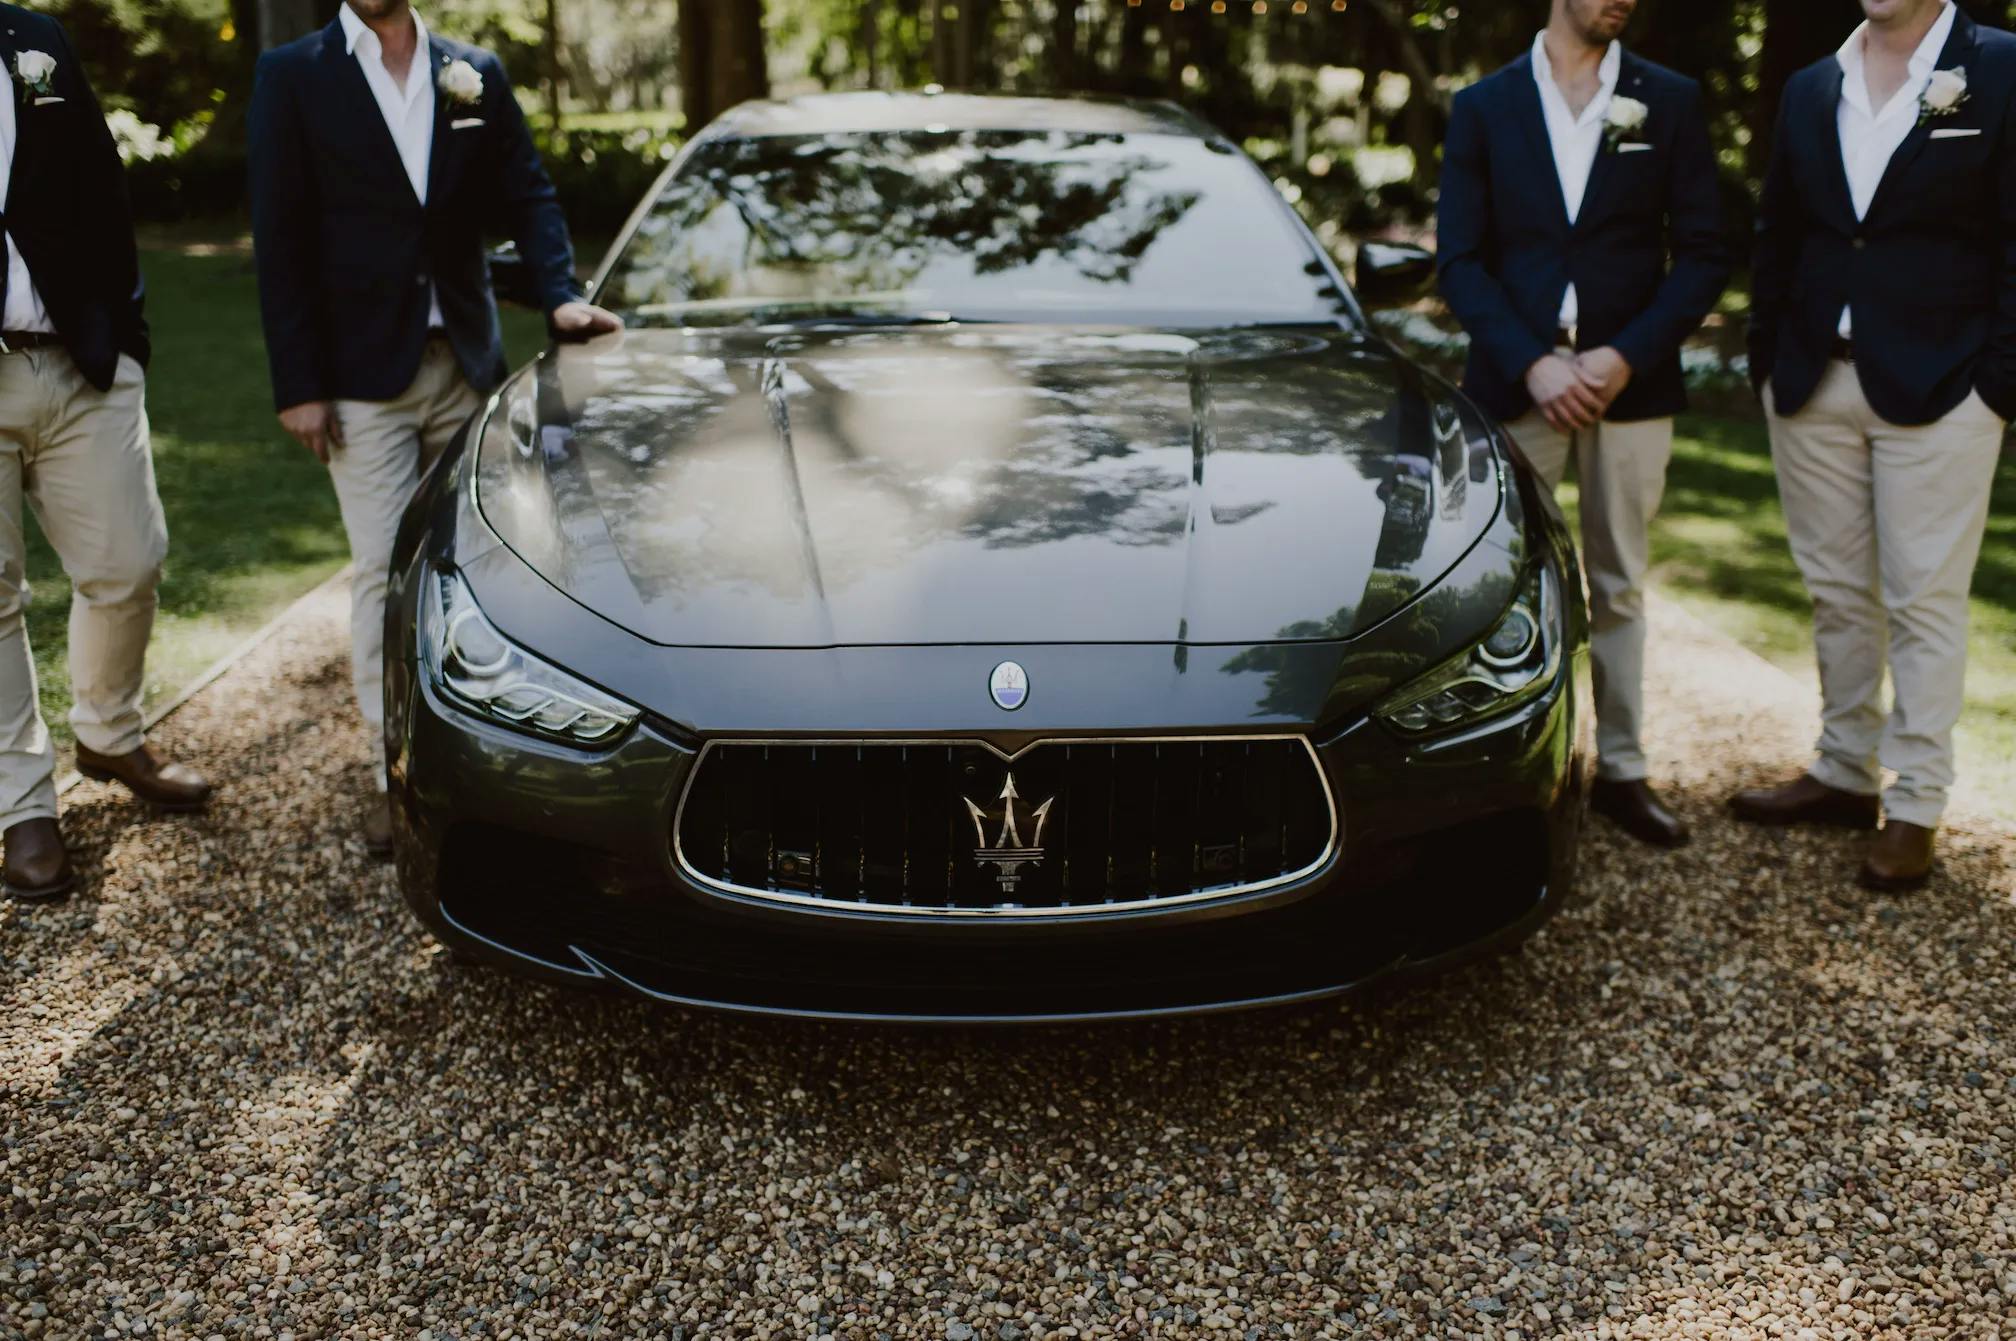 A sleek black Maserati sedan is parked on a gravel driveway, reflecting the surrounding trees and sunlight. Three men in dark blazers and light-colored pants stand on either side of the car, their faces out of frame.